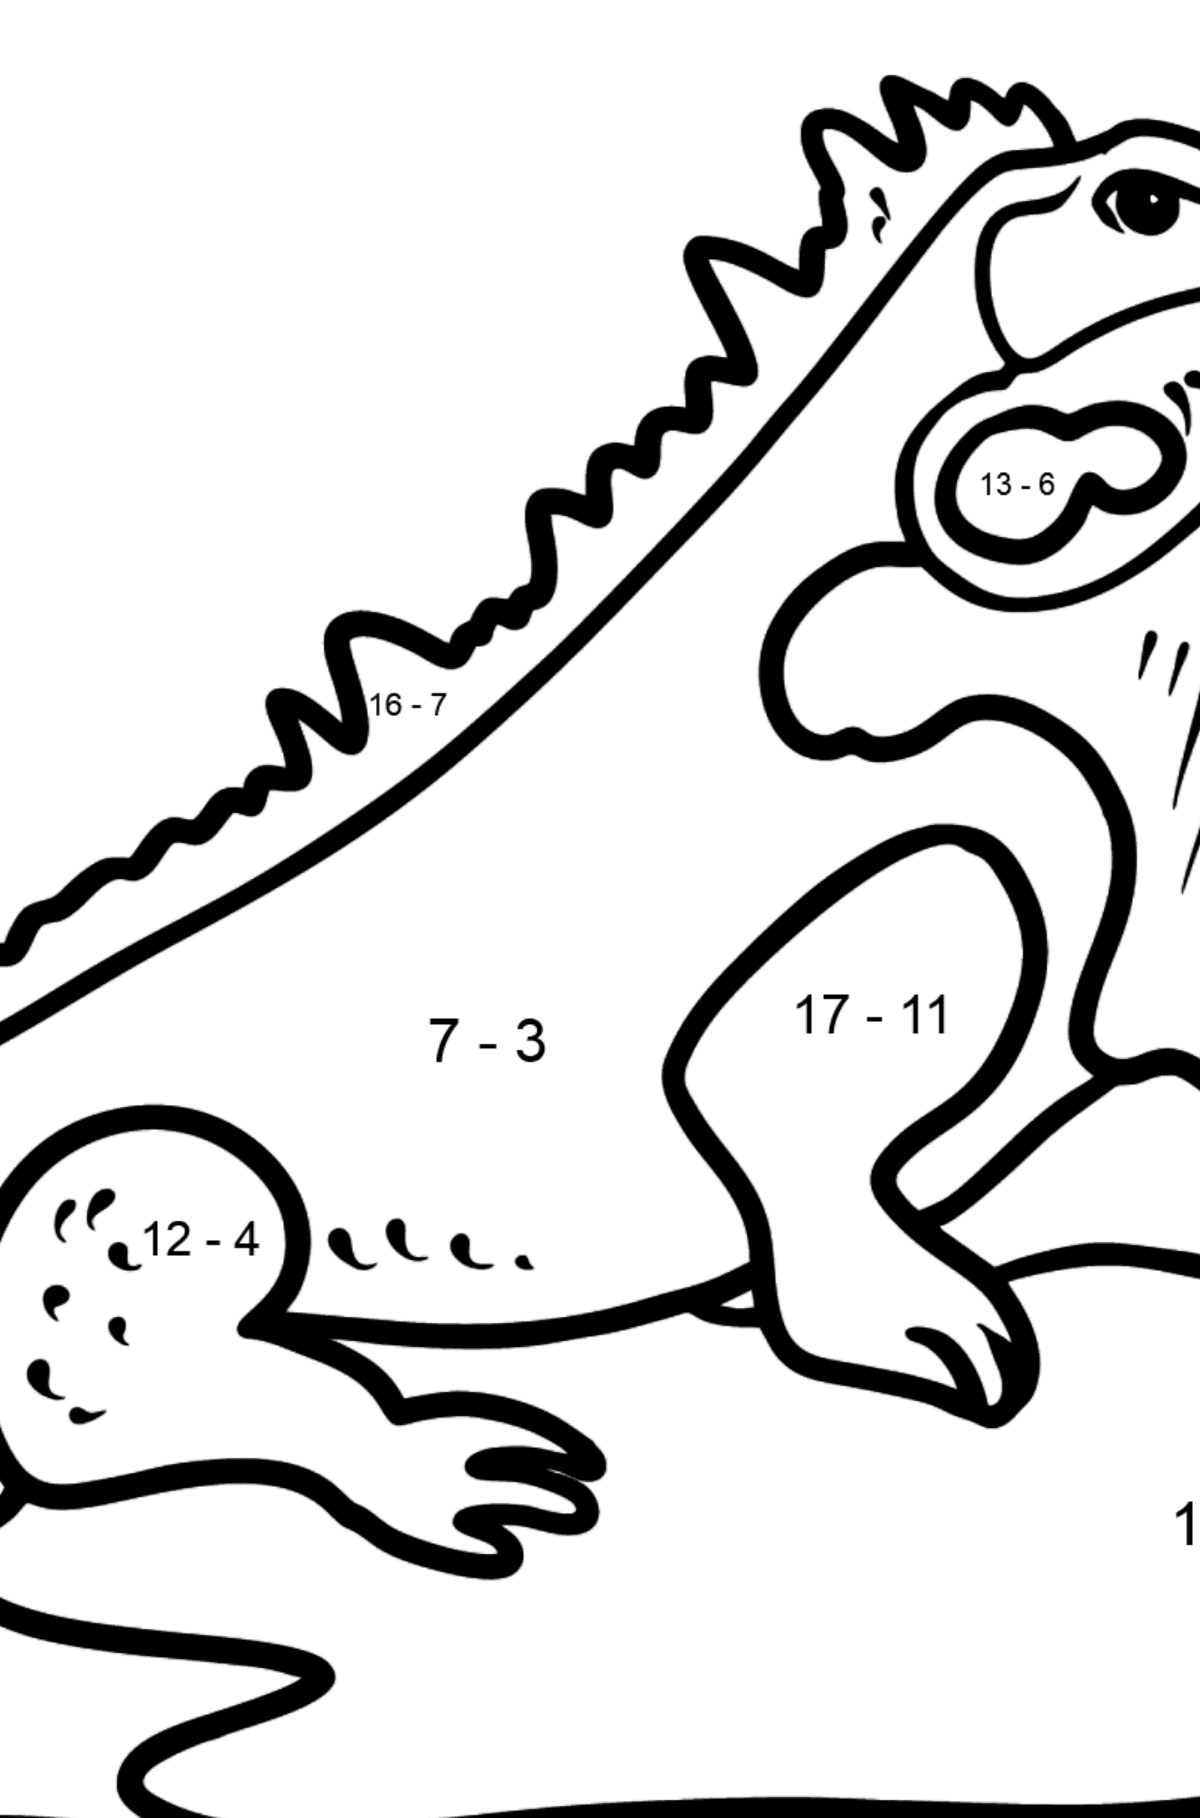 Portuguese Letter I coloring pages - IGUANA - Math Coloring - Subtraction for Kids